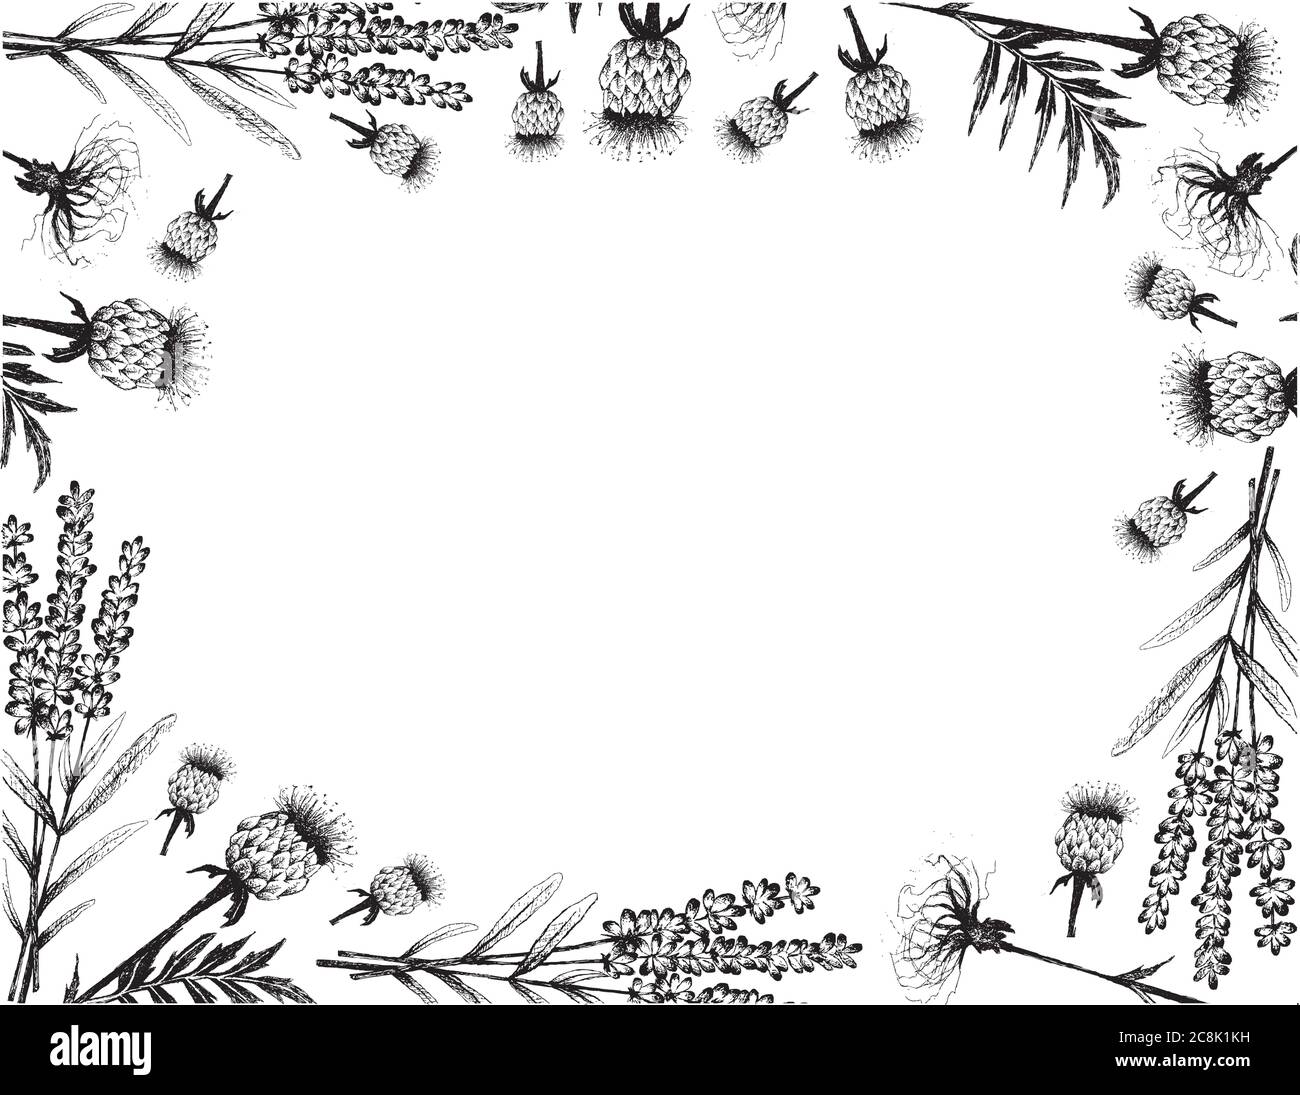 Herbal Flower and Plant, Hand Drawn Illustration Frame of Lavender Flowers and Rhaponticum Carthamoides or Maral Root Plants. Stock Vector